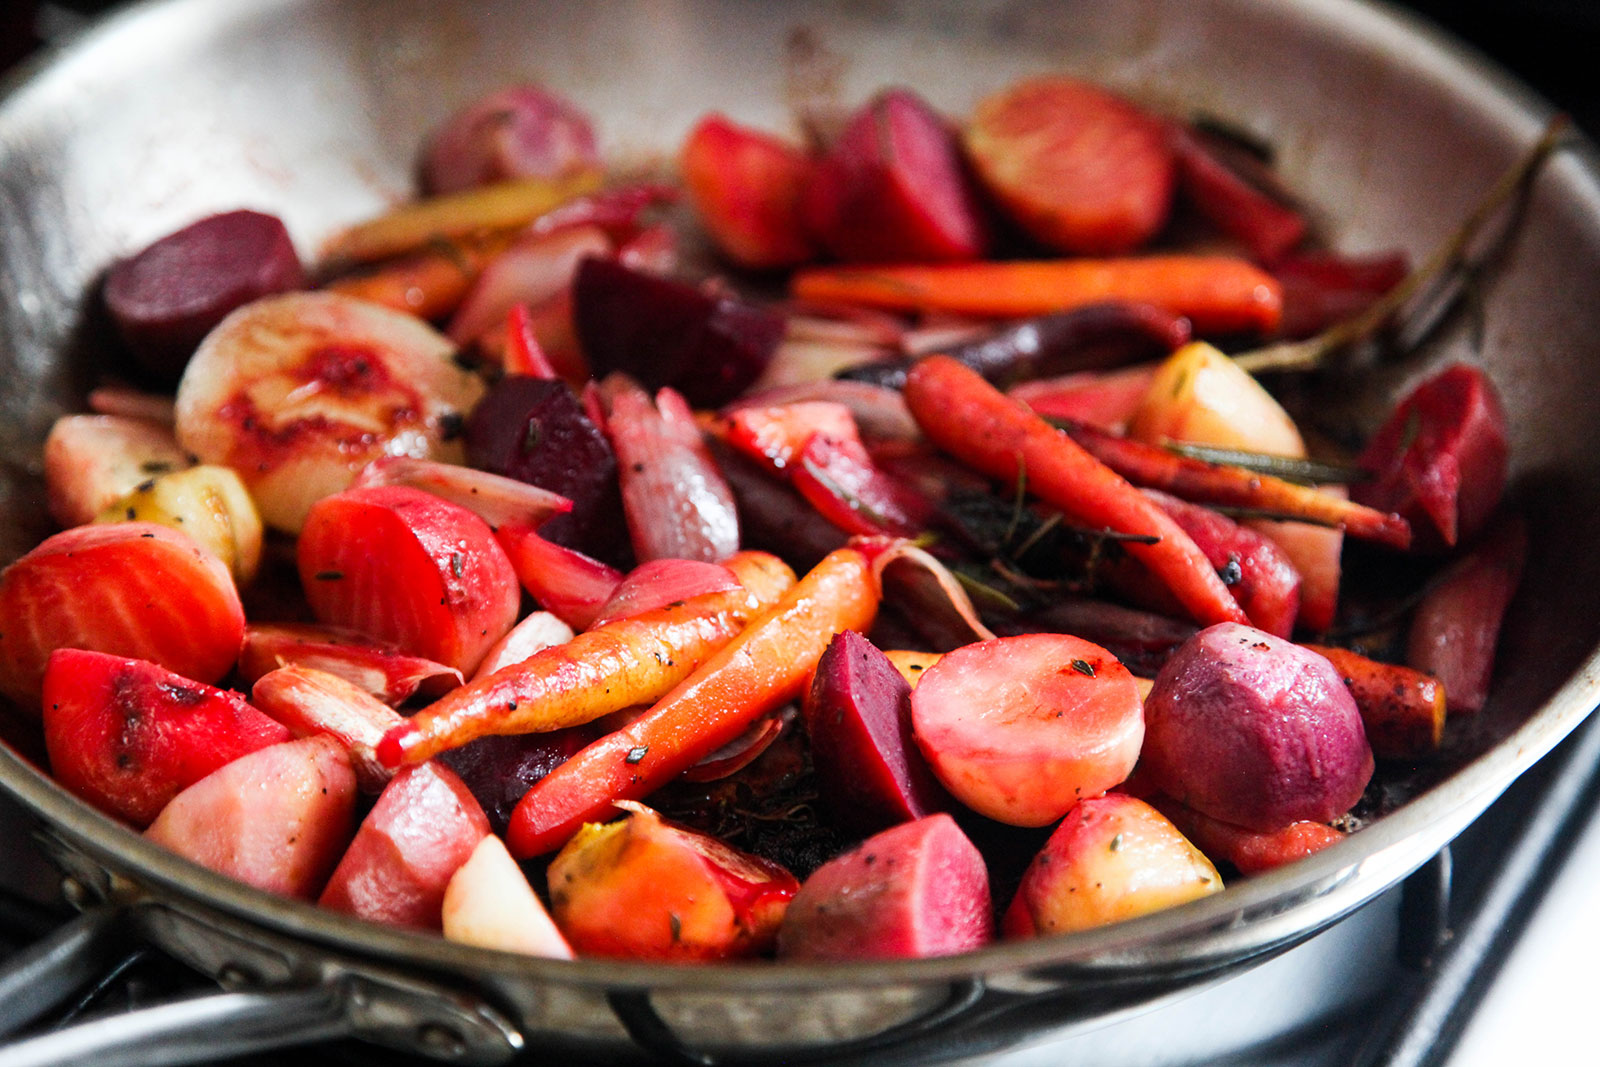 Roasted Root Vegetables with Herbs. Recipe on KitchenGatherings.com